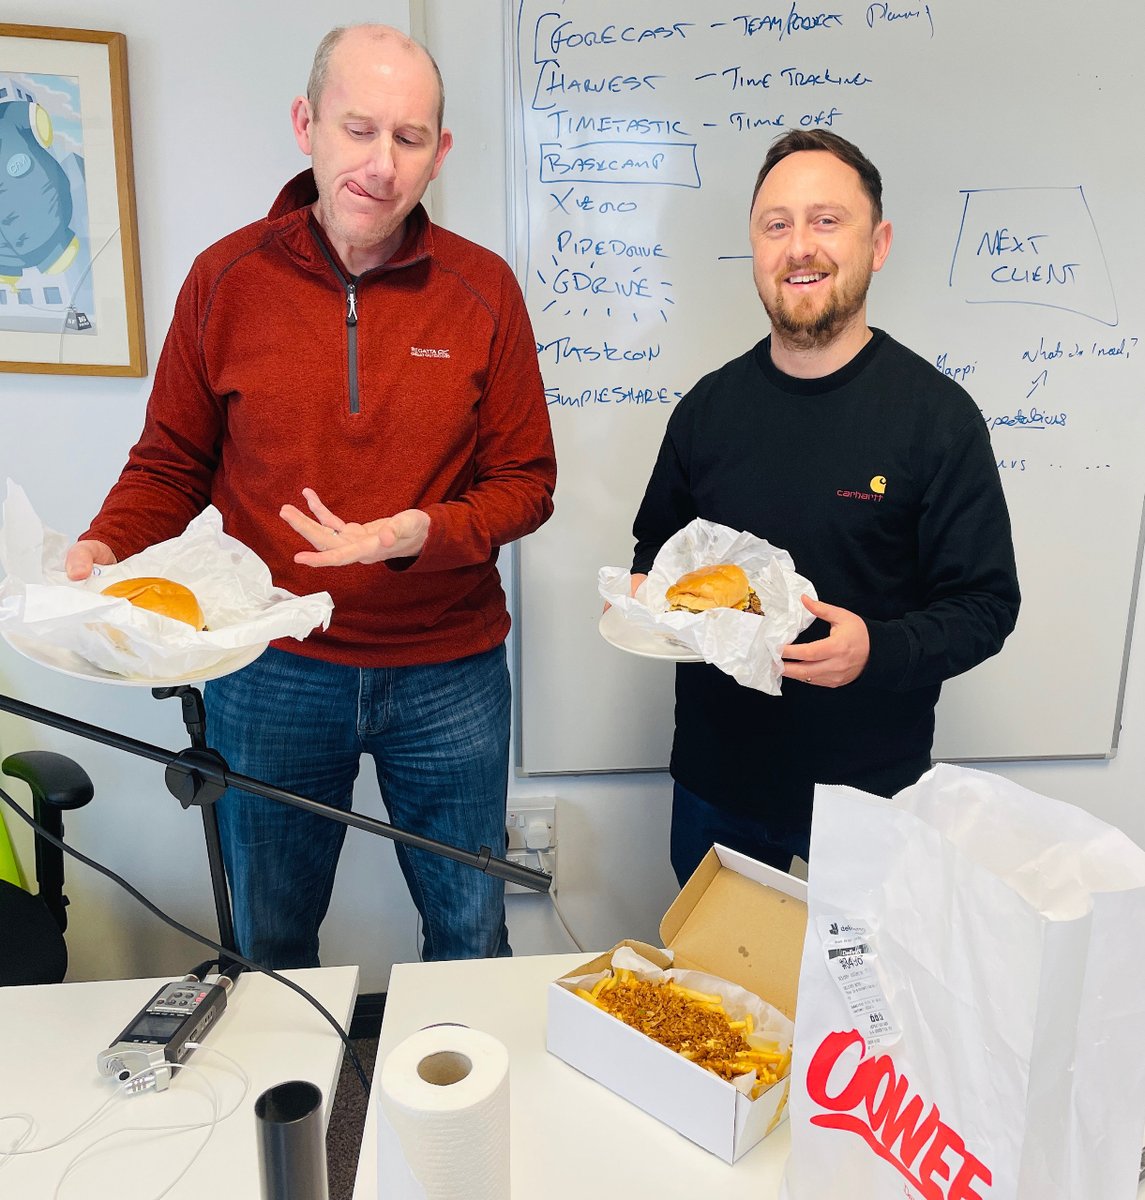 What a morning! Today we were treated, back together in the studio but this time with delicious burgers and dirty fries! Yum! Oh and we recorded a podcast… keep your ears peeled for episode 6 coming soon!